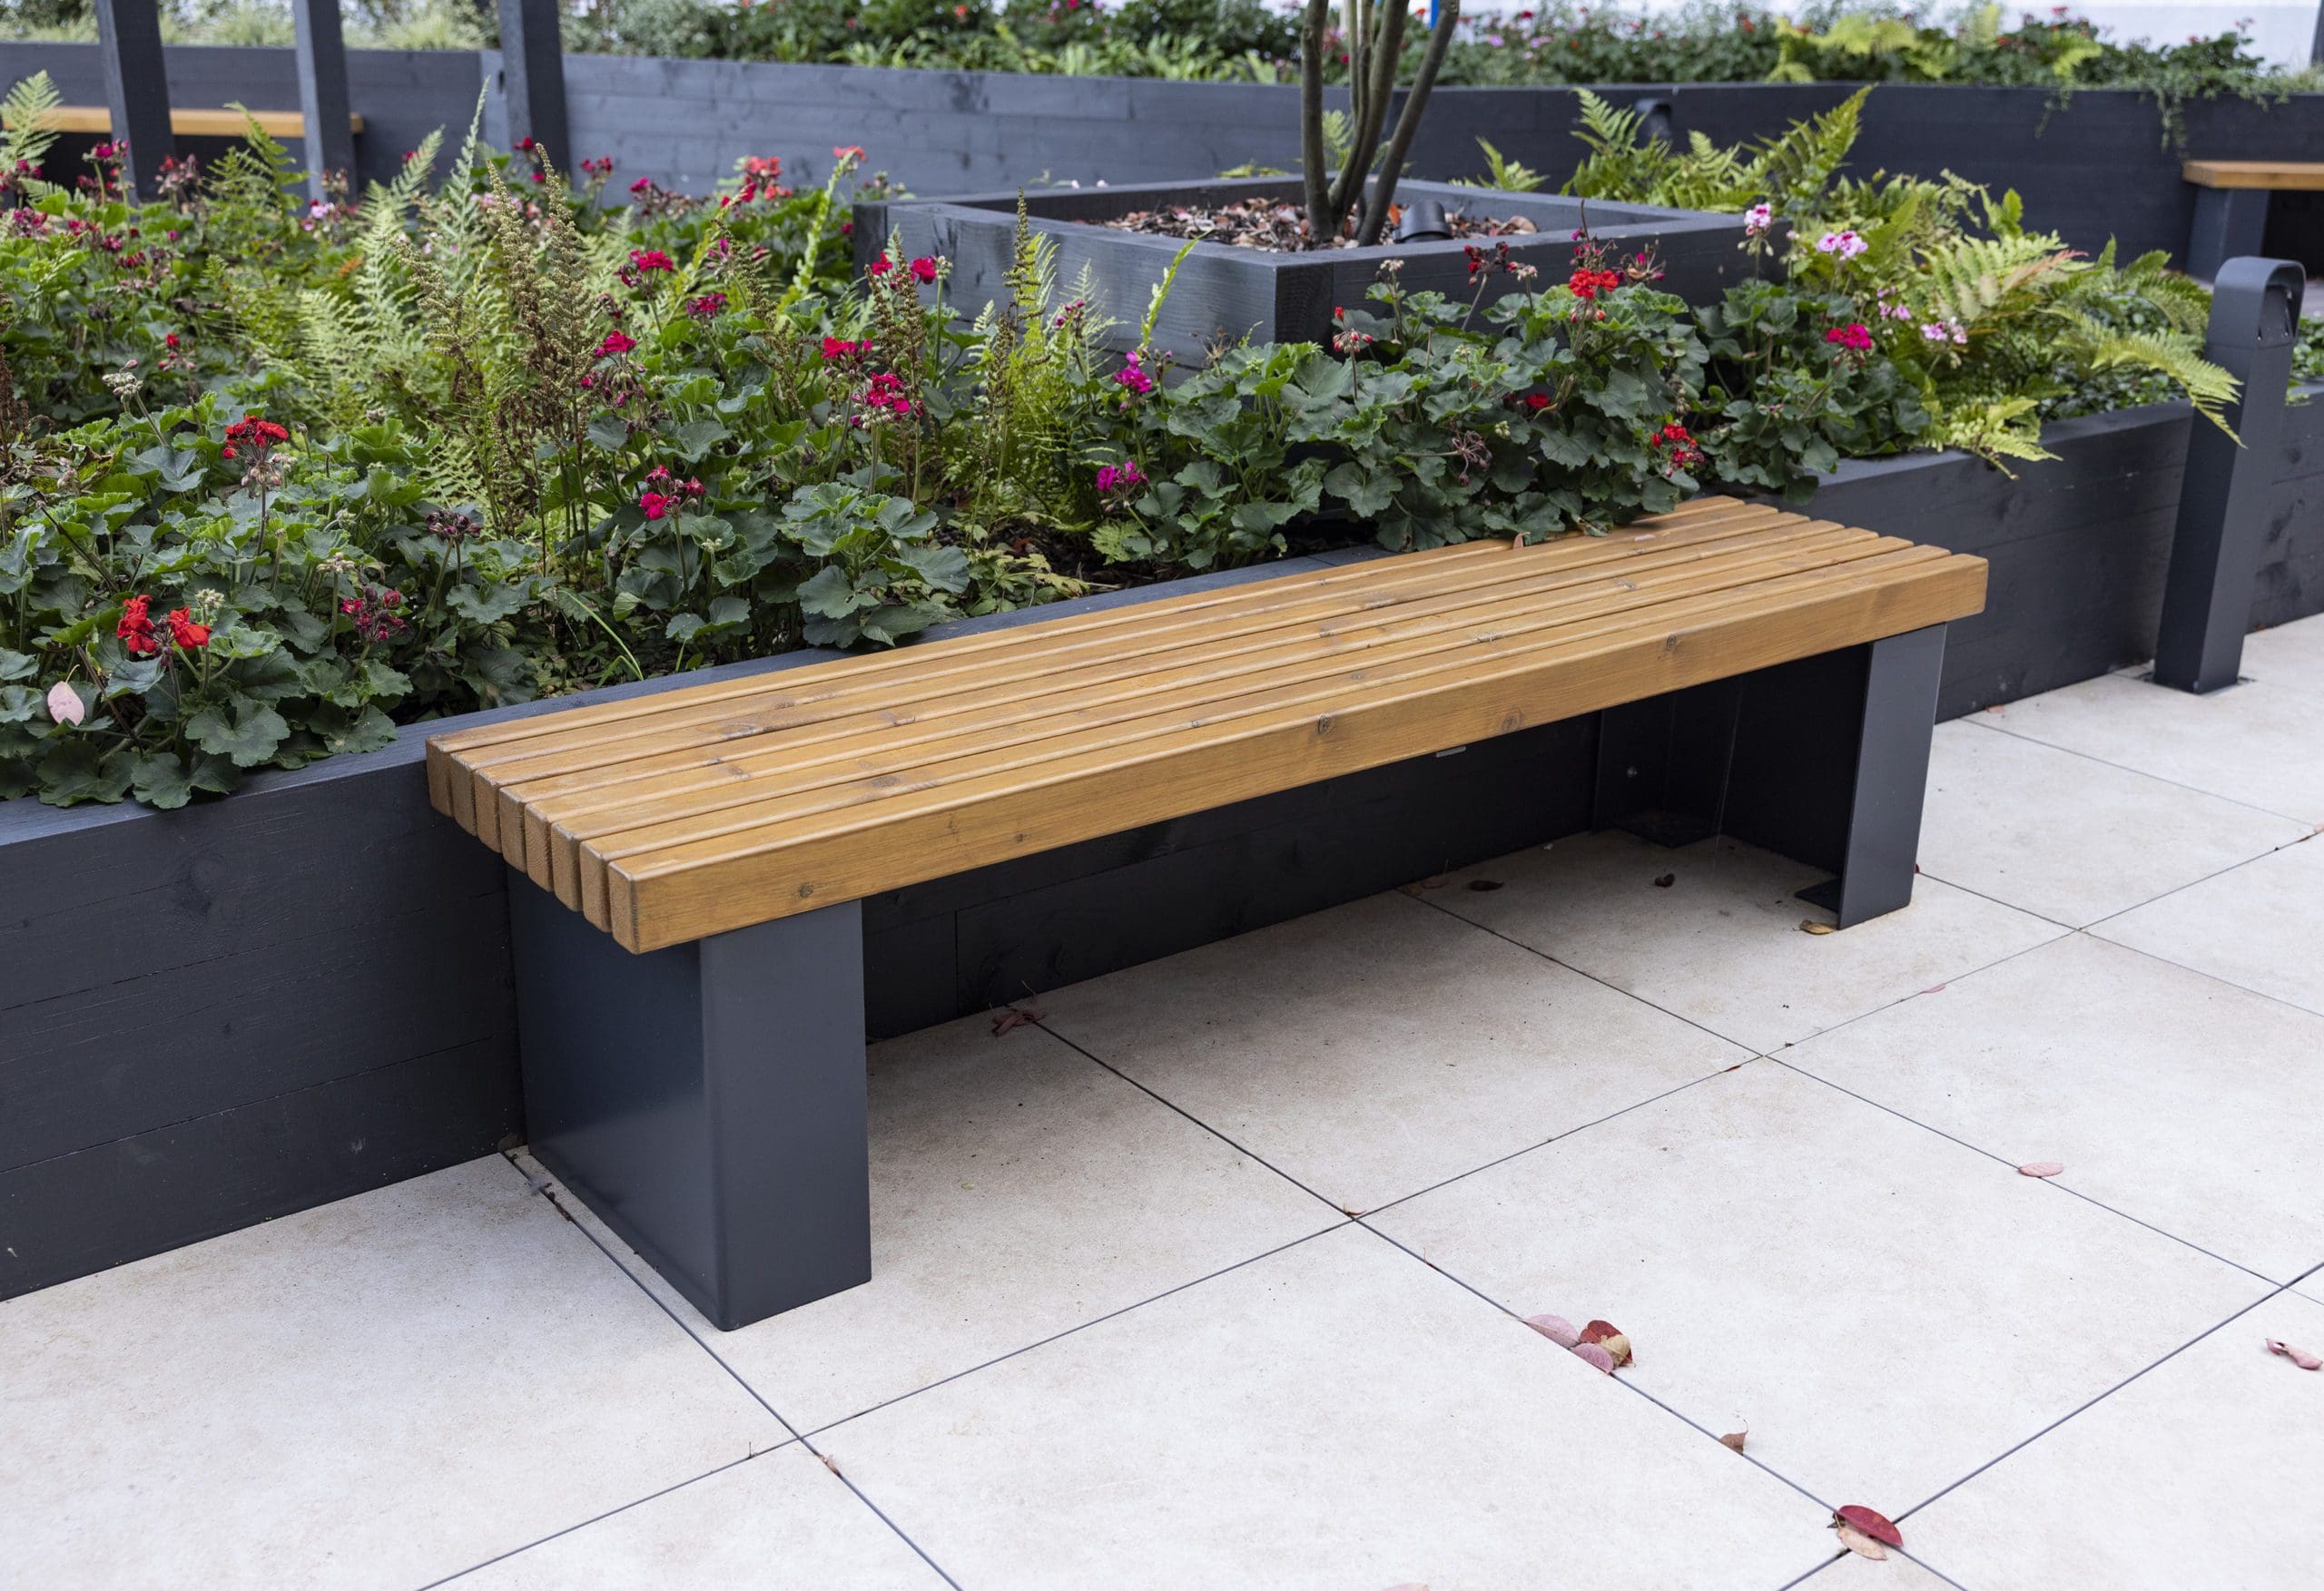 wooden bench with black metal legs infront of plants